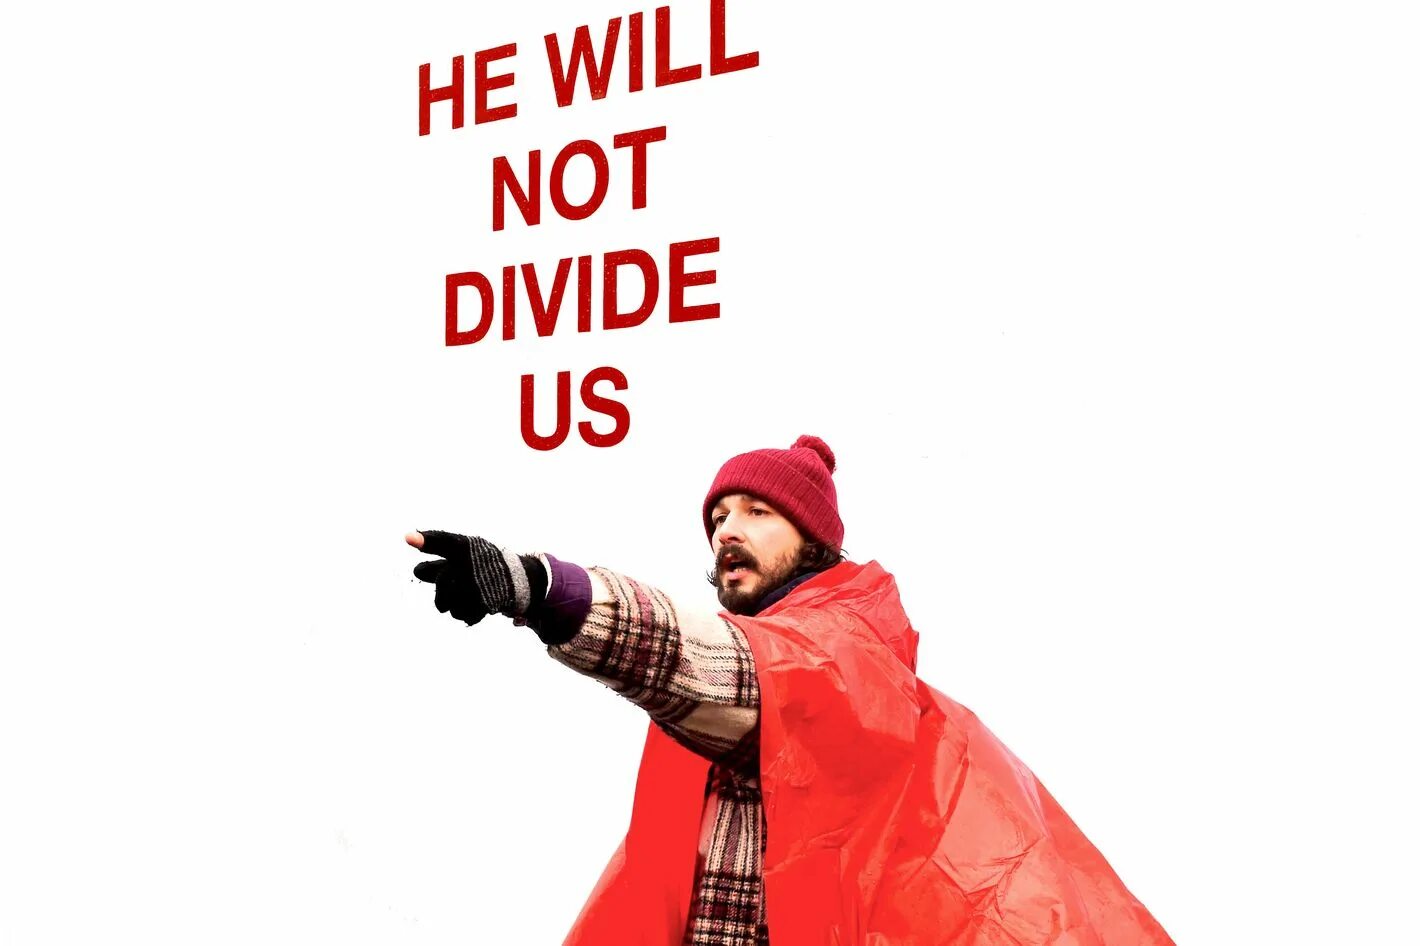 He will not give. Шайа ЛАБАФ флаг. He will not Divide us. He will not Divide us meme. Шайа ЛАБАФ трансформеры he will not Divide us.